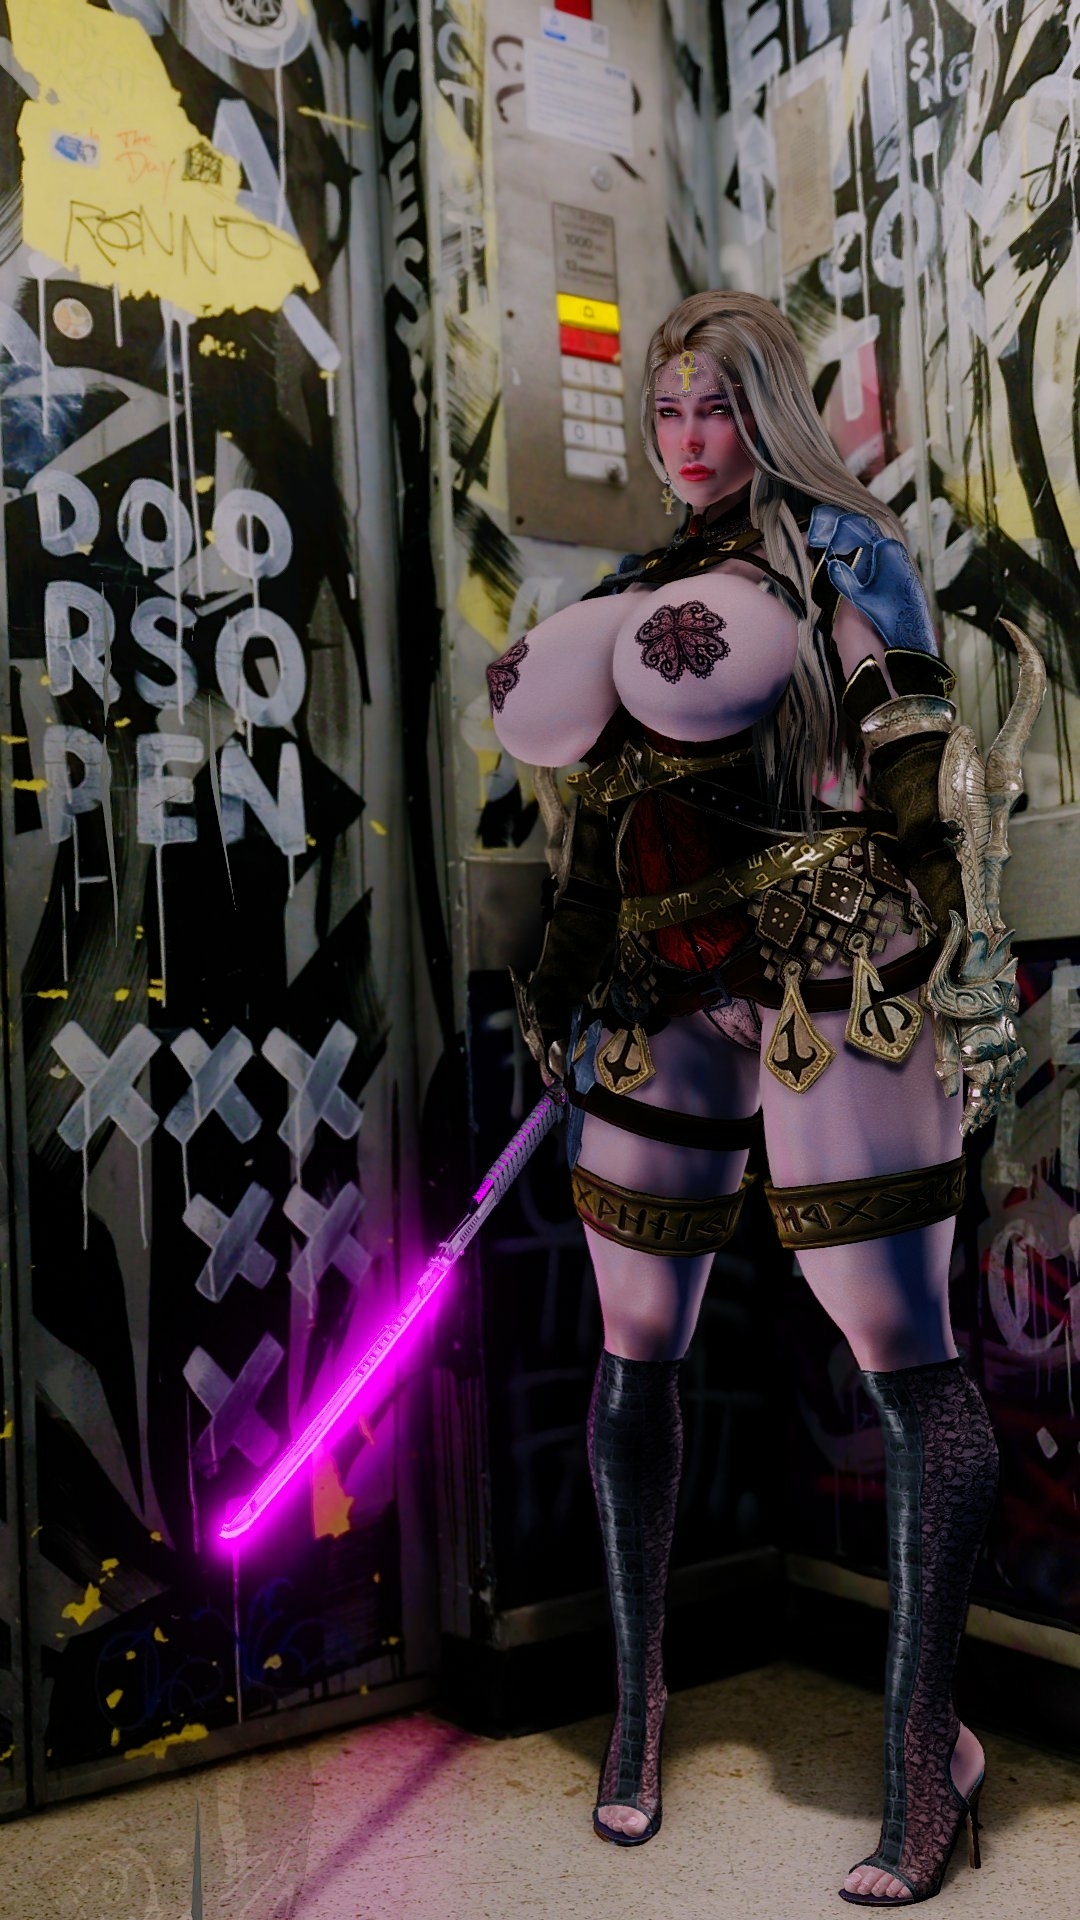 Hot Female Warrior sexy outfit with a purple laser sword Skyrim 3D porn modding Skyrim Female Warrior Blonde Sword Lingerie Armor Pussy Big Tits High Heels Big Legs Muscular Girl Muscles Game Videogame